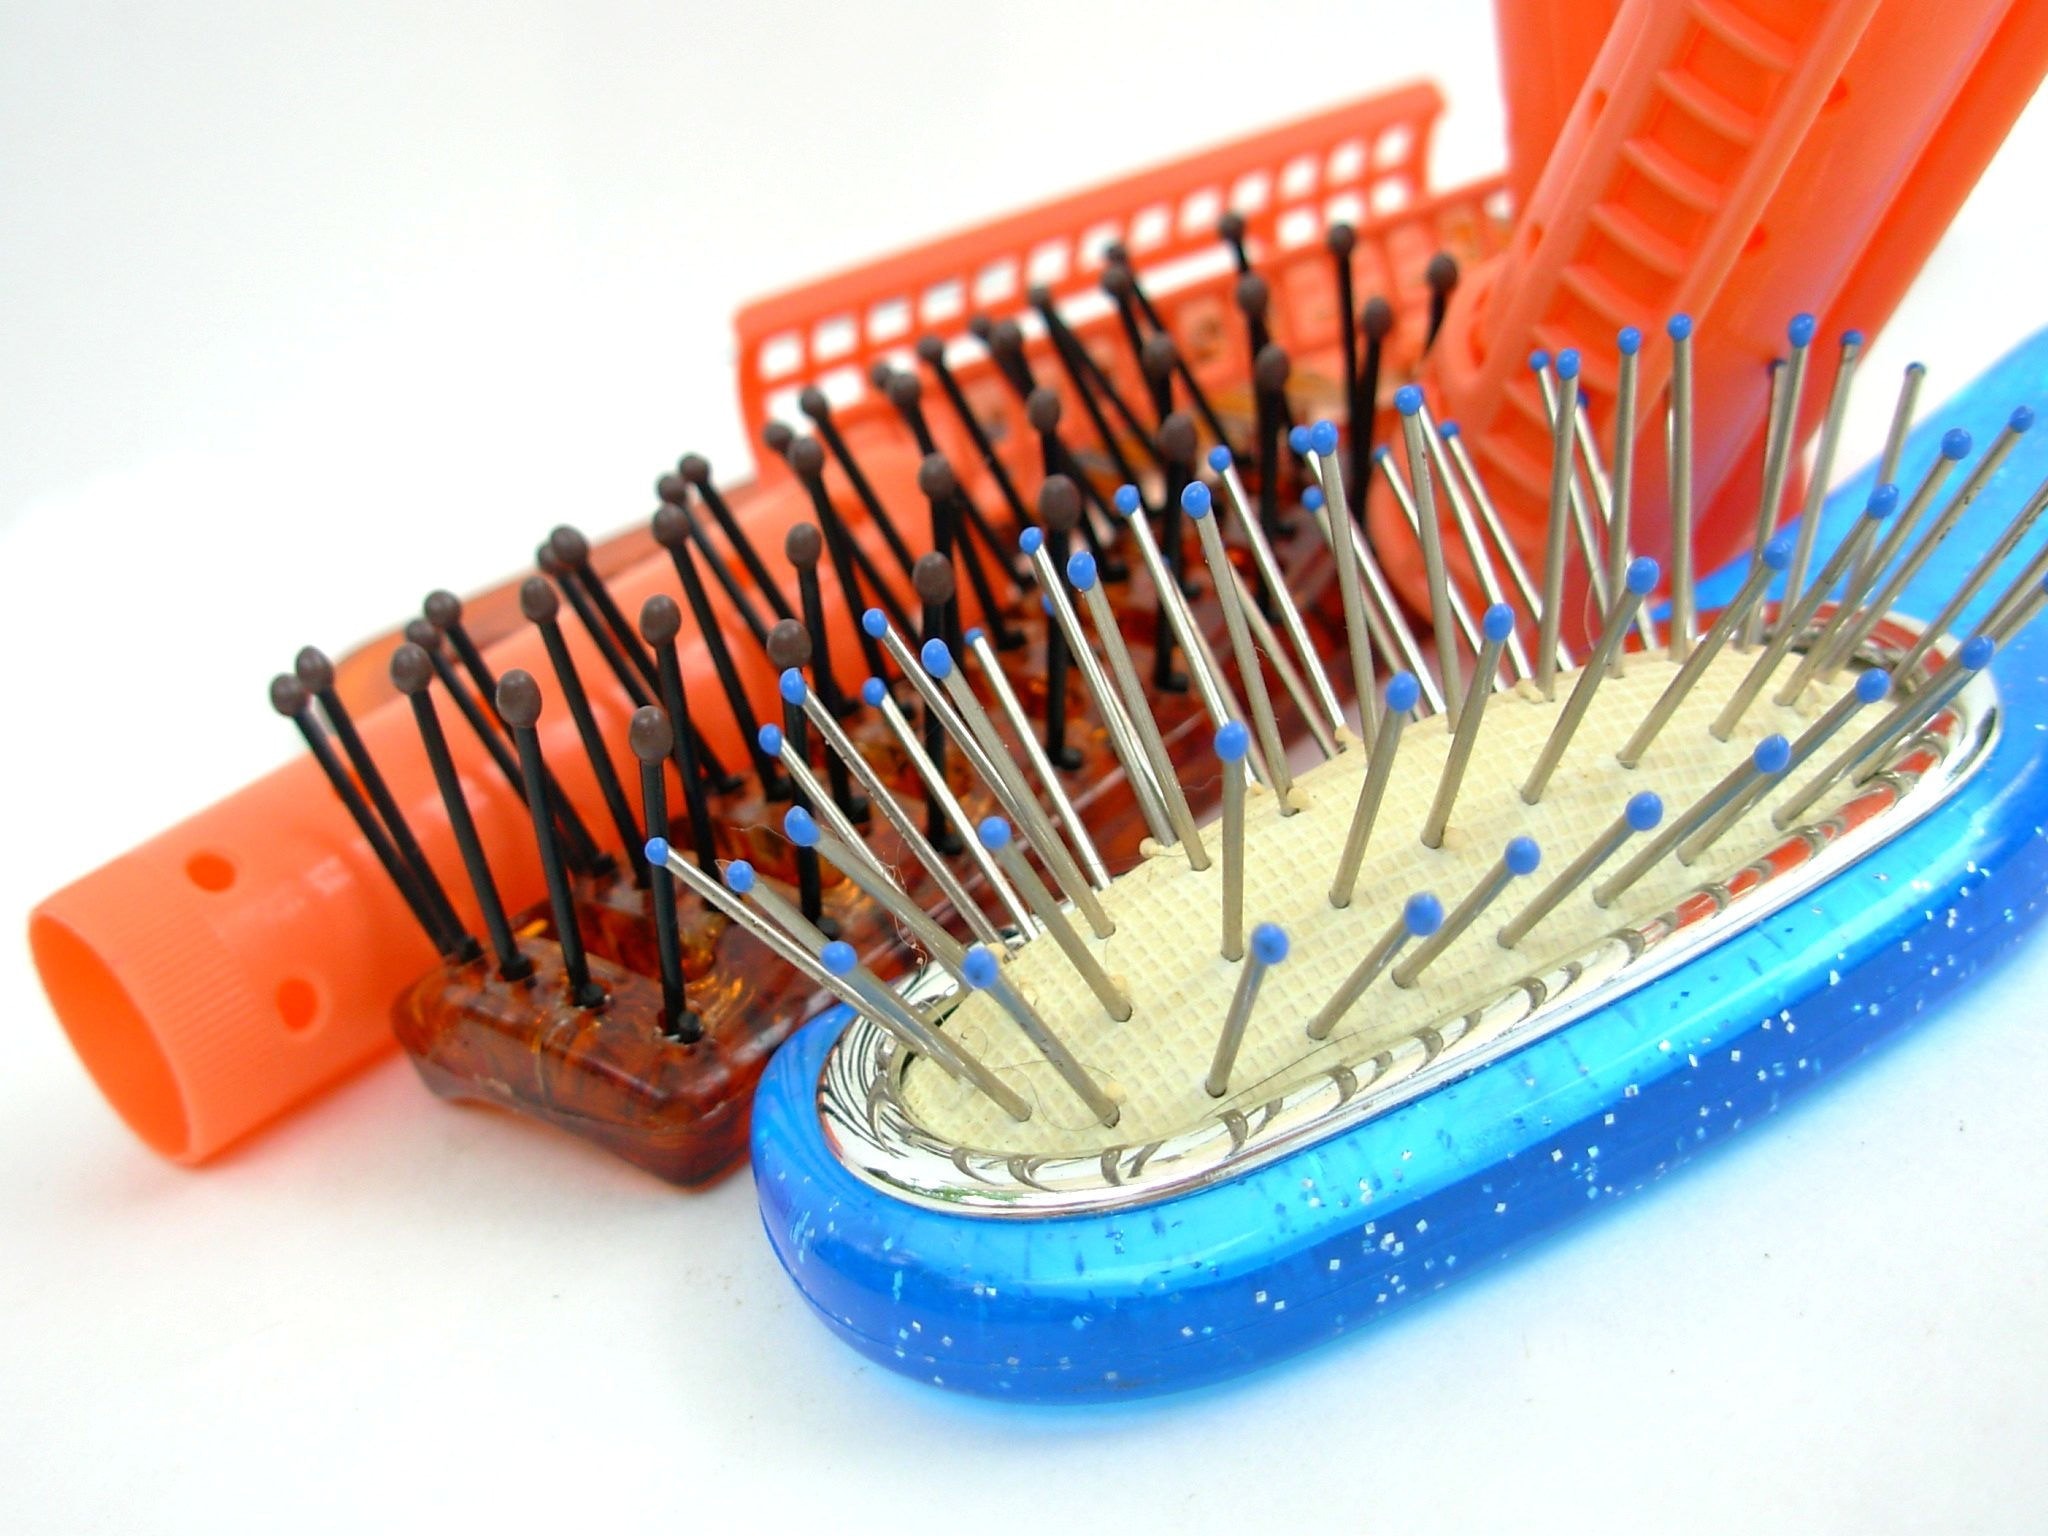 Comb, Hairbrush, Hair Comb, Brush, Hair, multi colored, close-up